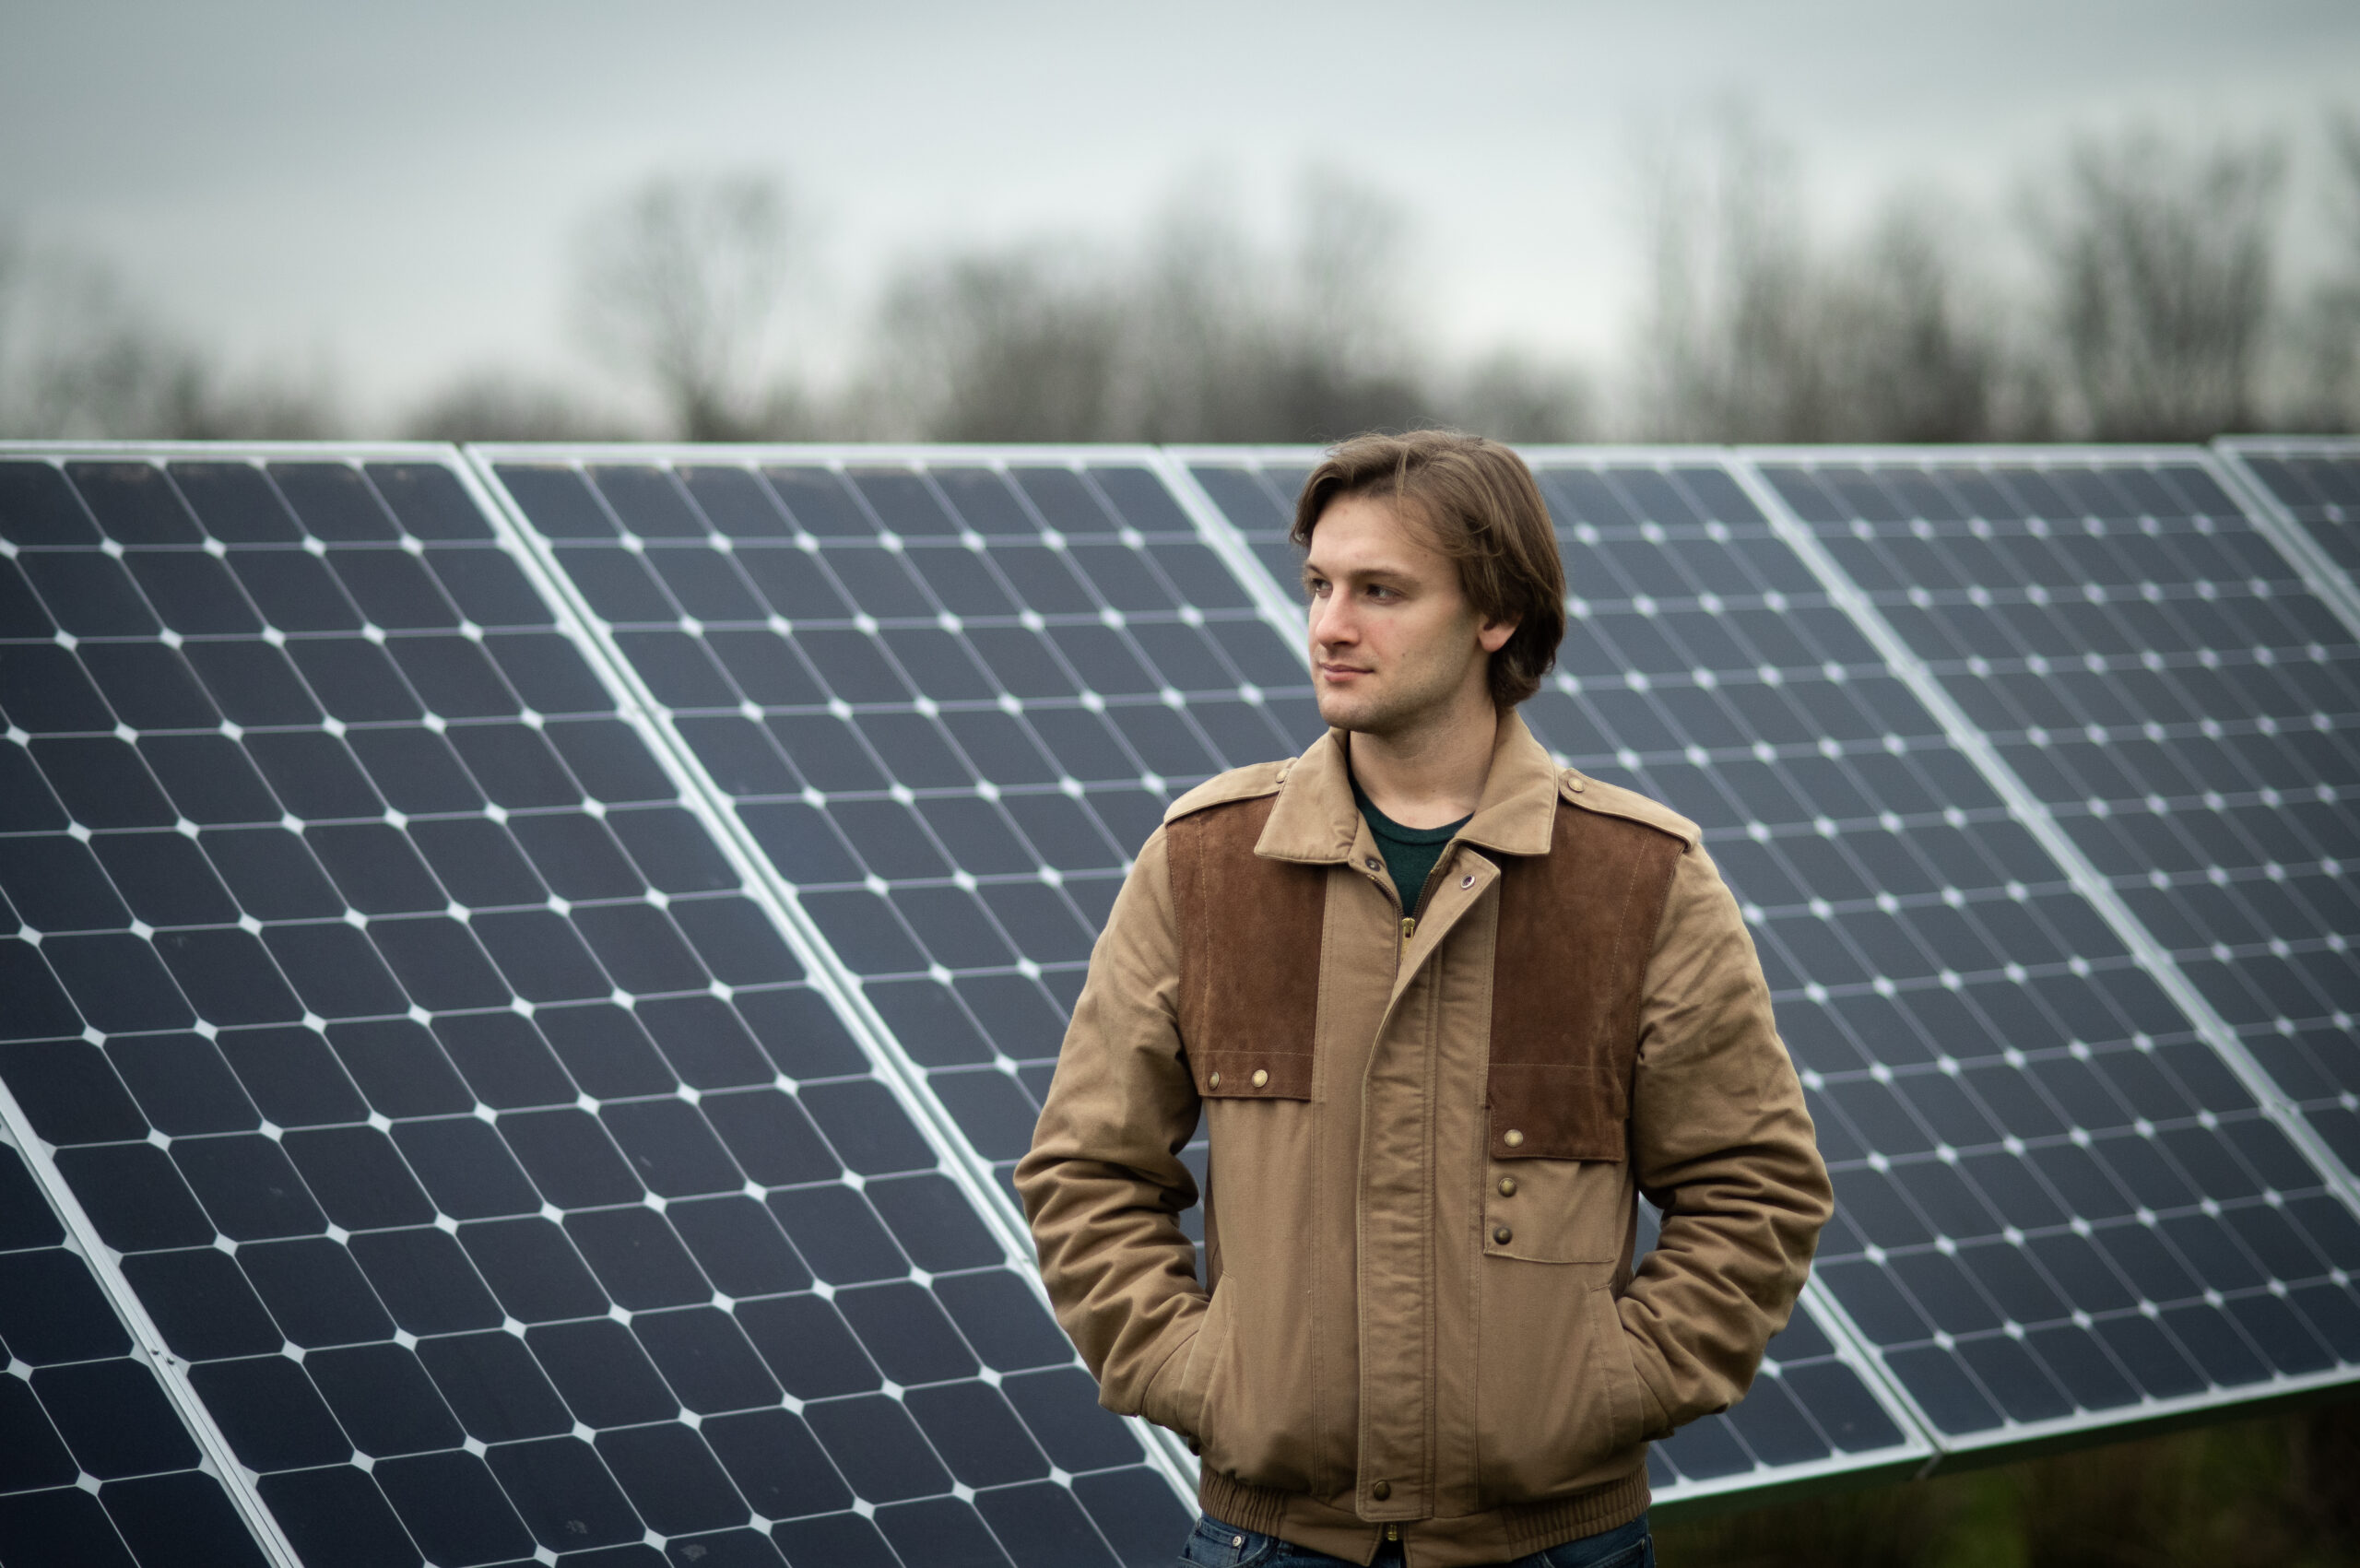 A man stands in front of a solar panel array.